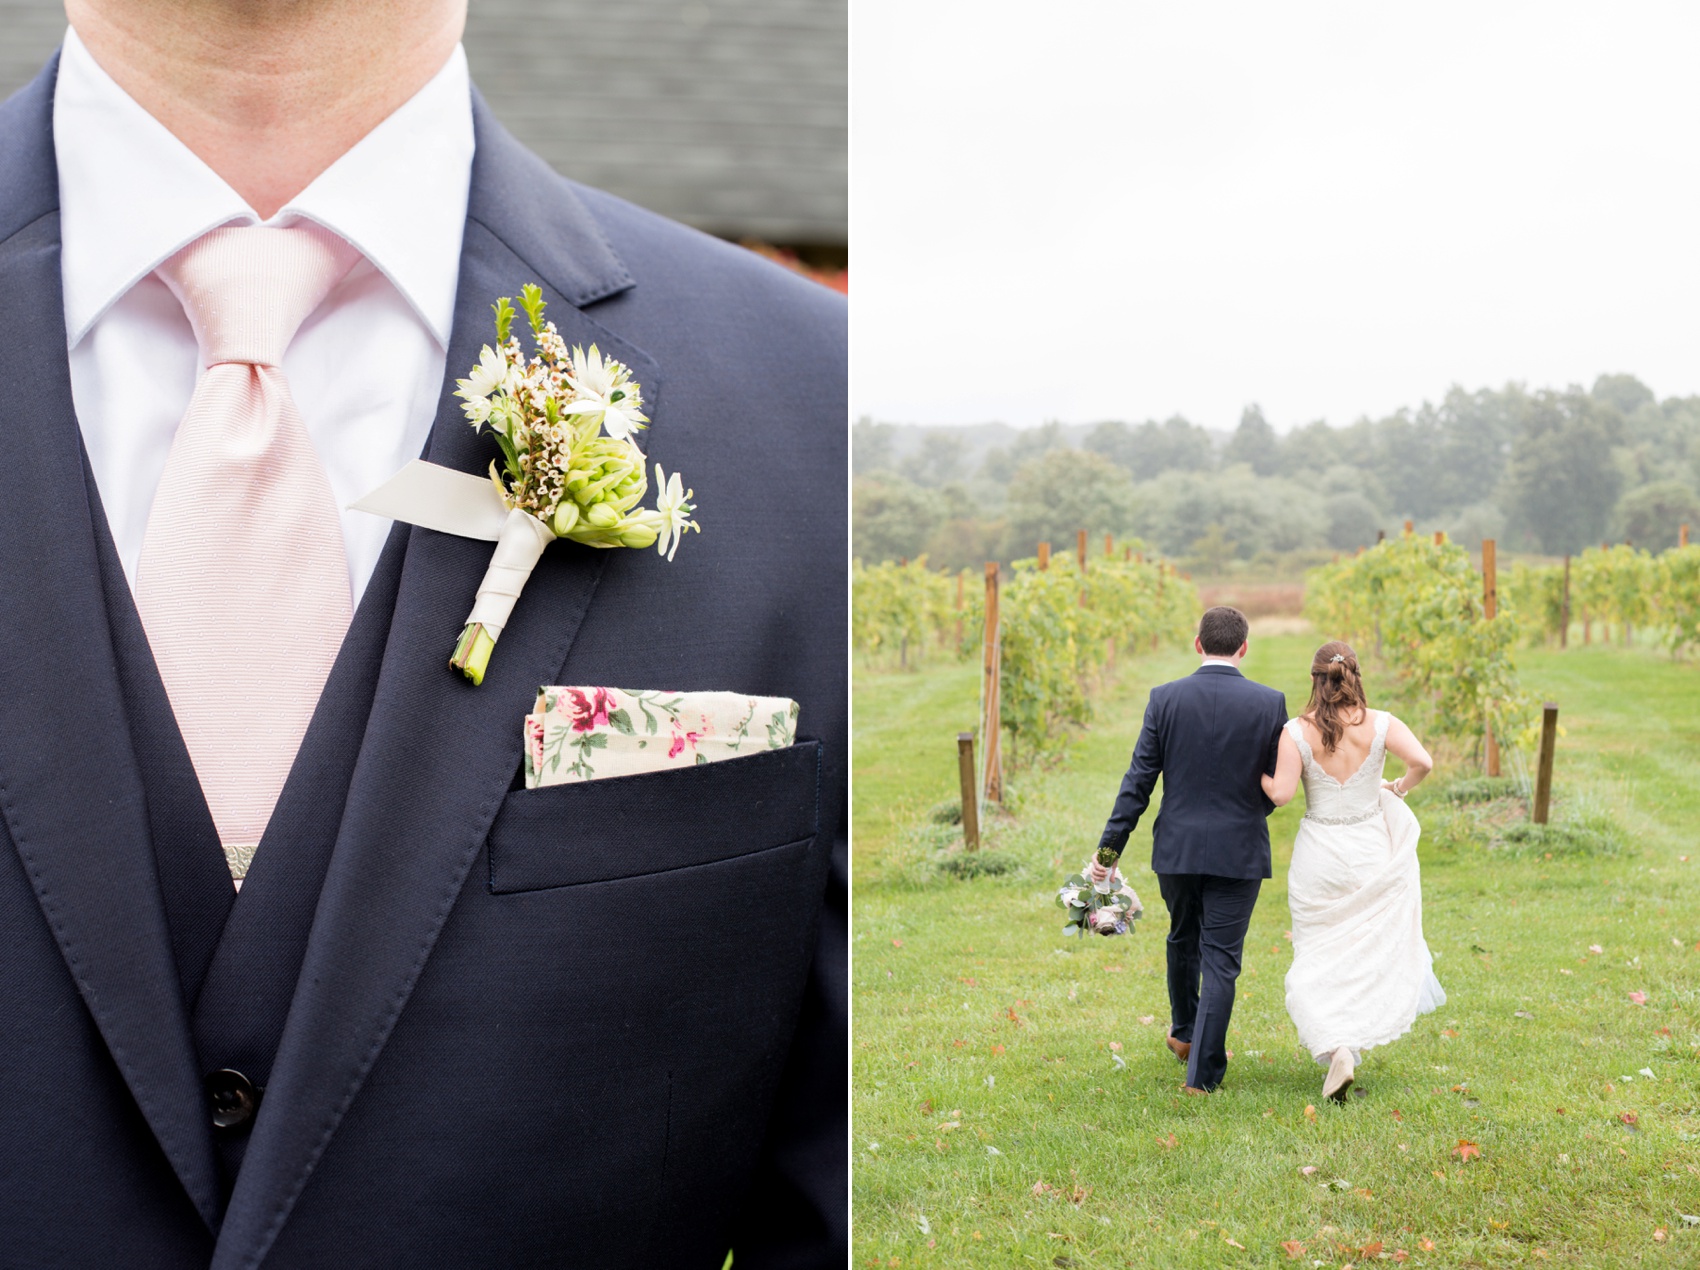 A Red Maple Vineyard wedding and unique boutonniere. Photo by NYC wedding photographer Mikkel Paige Photography.